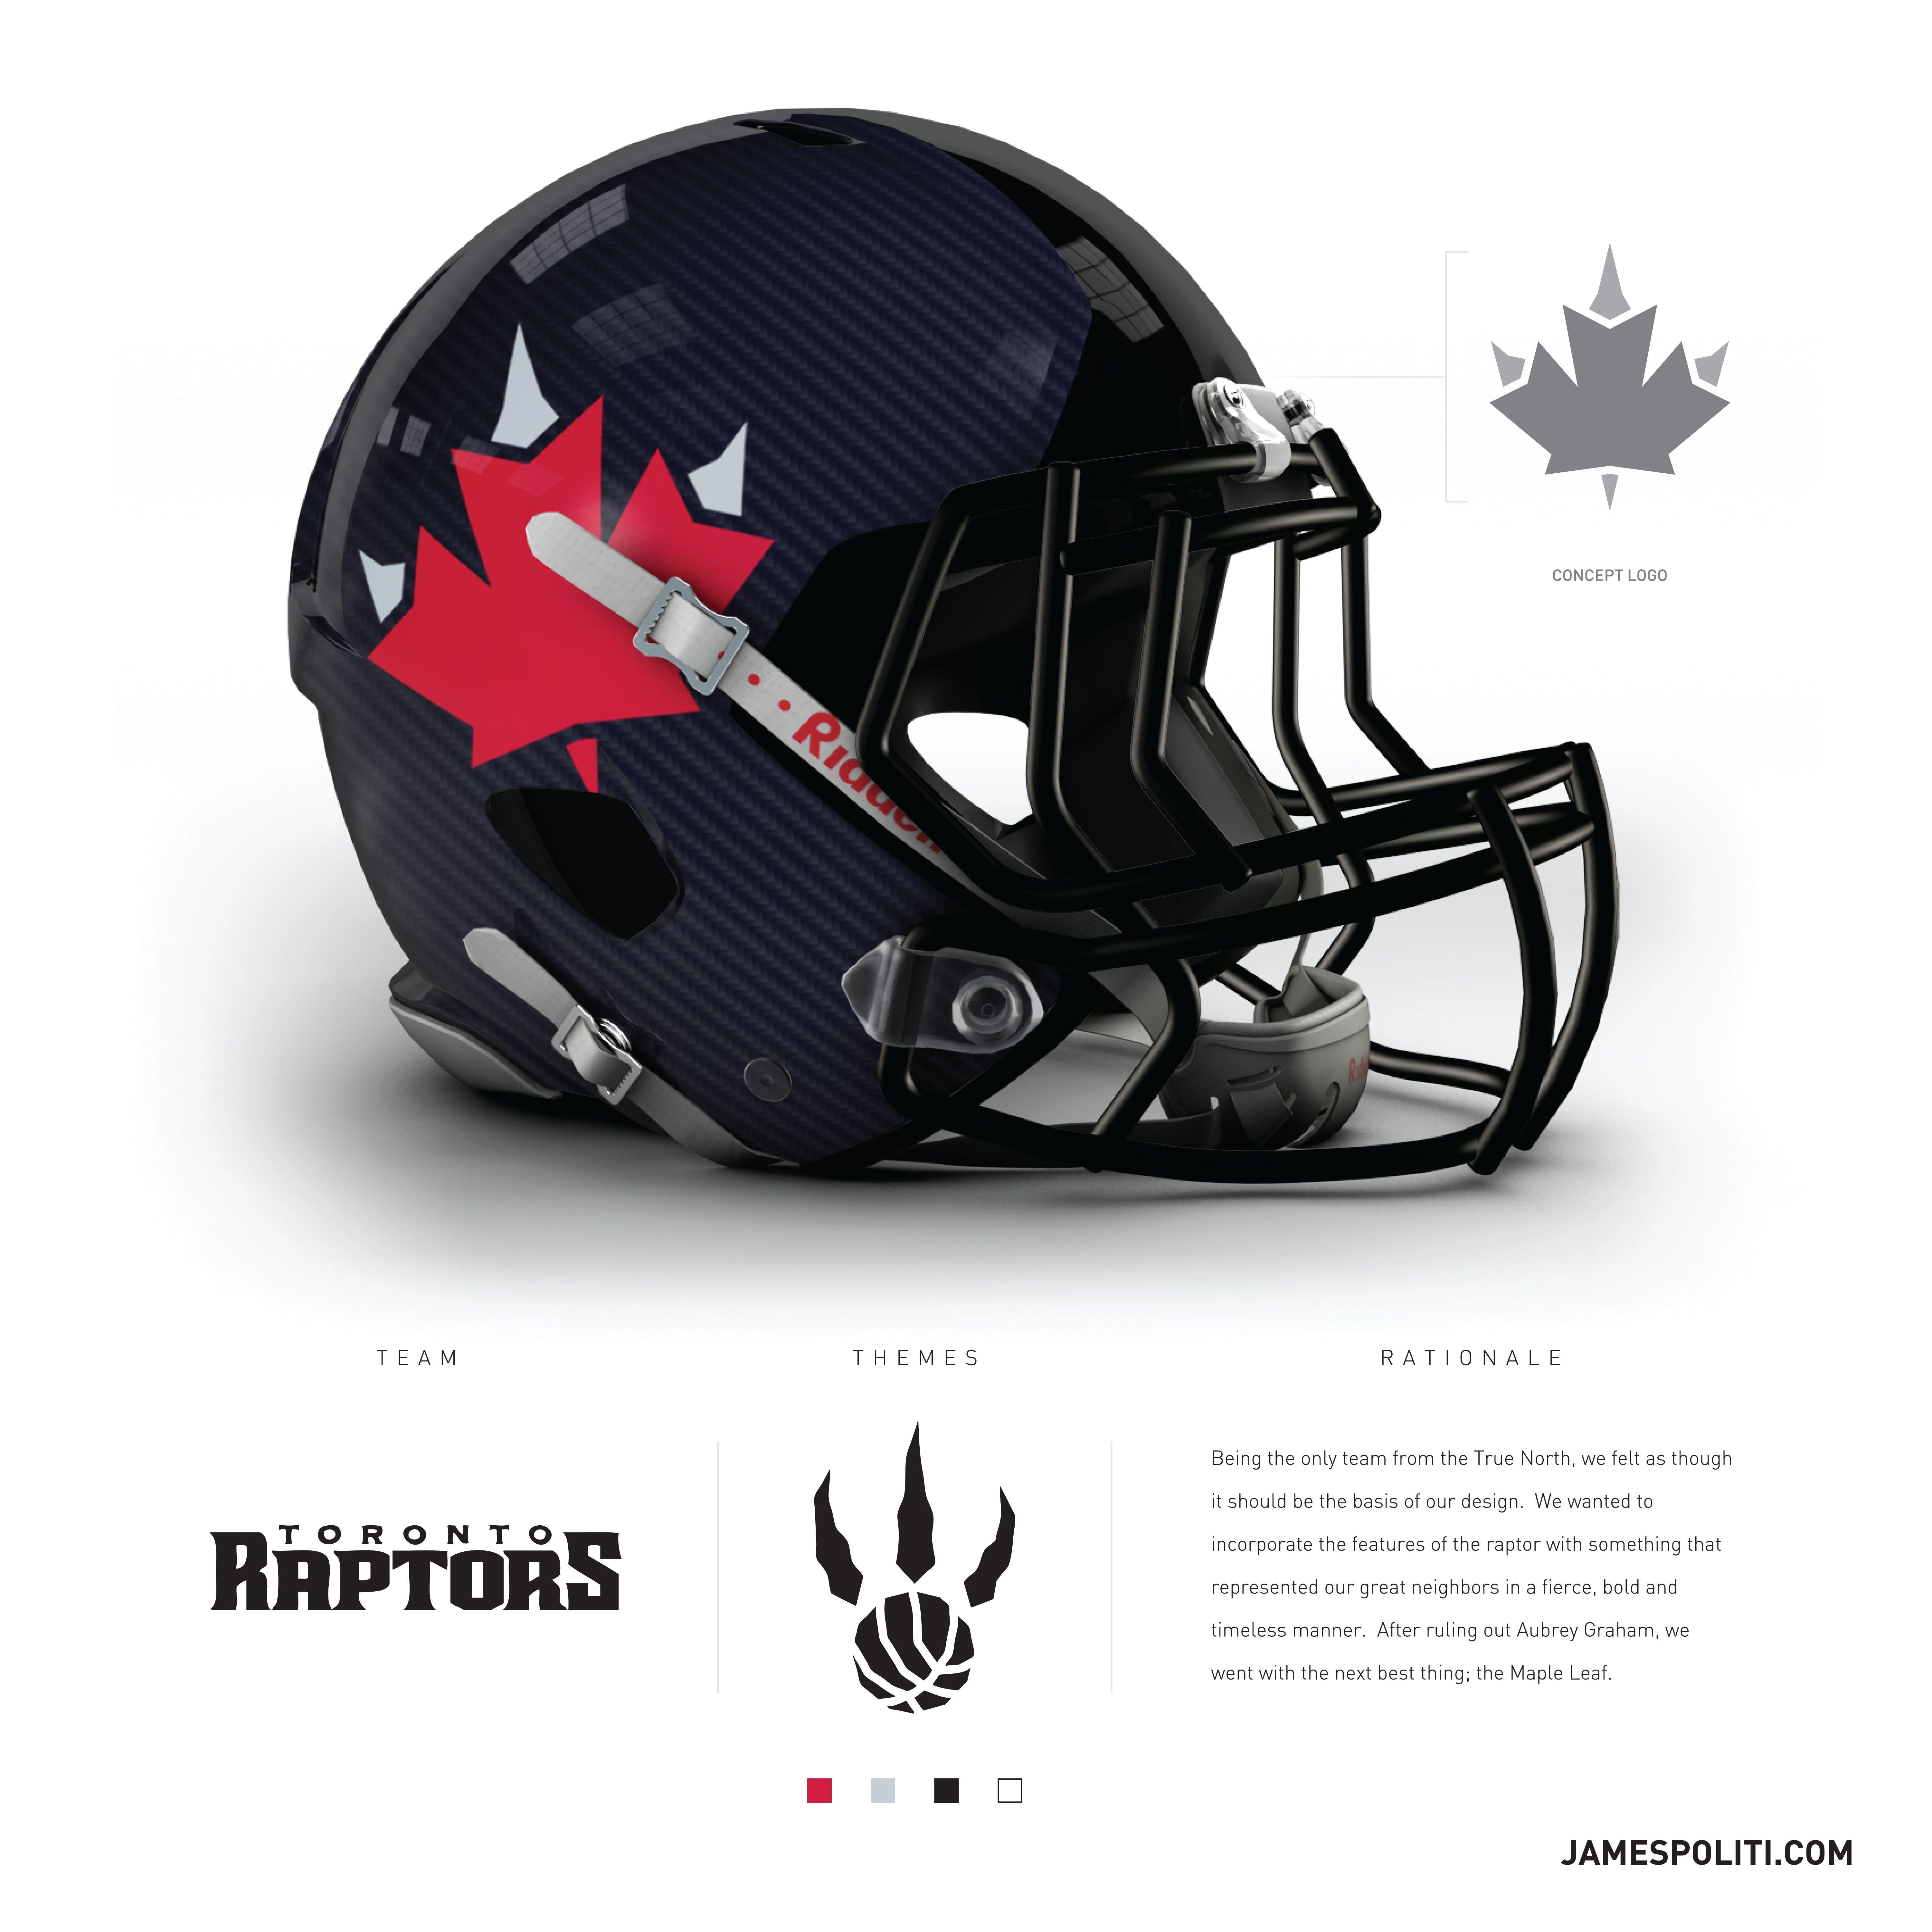 Cool Raptors Logo - Check out this cool Raptors logo concept in this graphic designer's ...